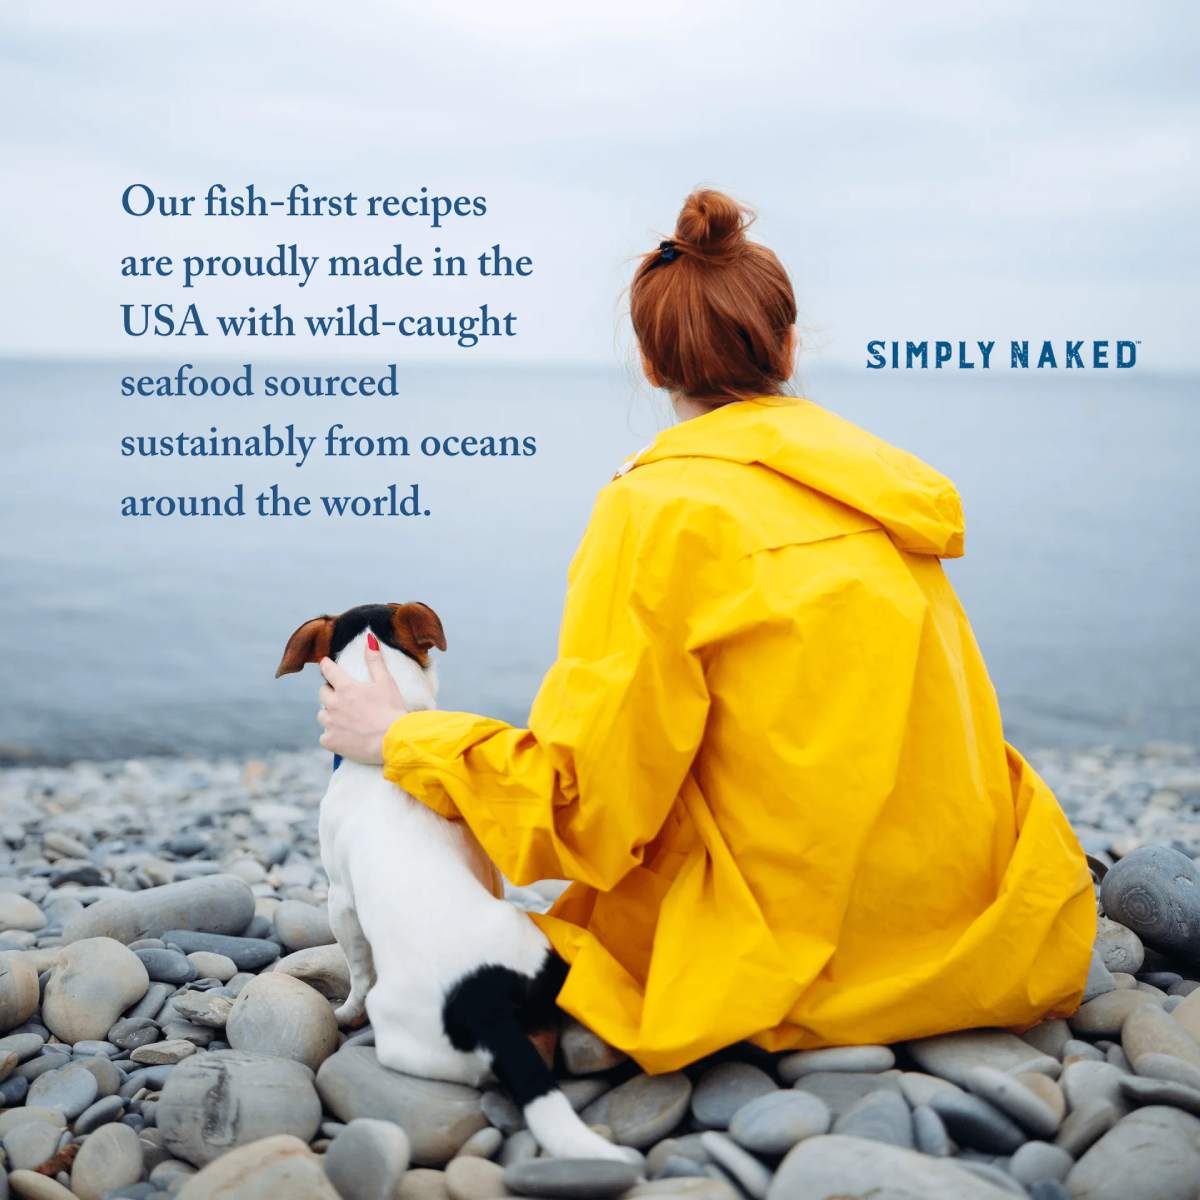 Simply Naked recipes are made in the USA with sustainably sourced seafood